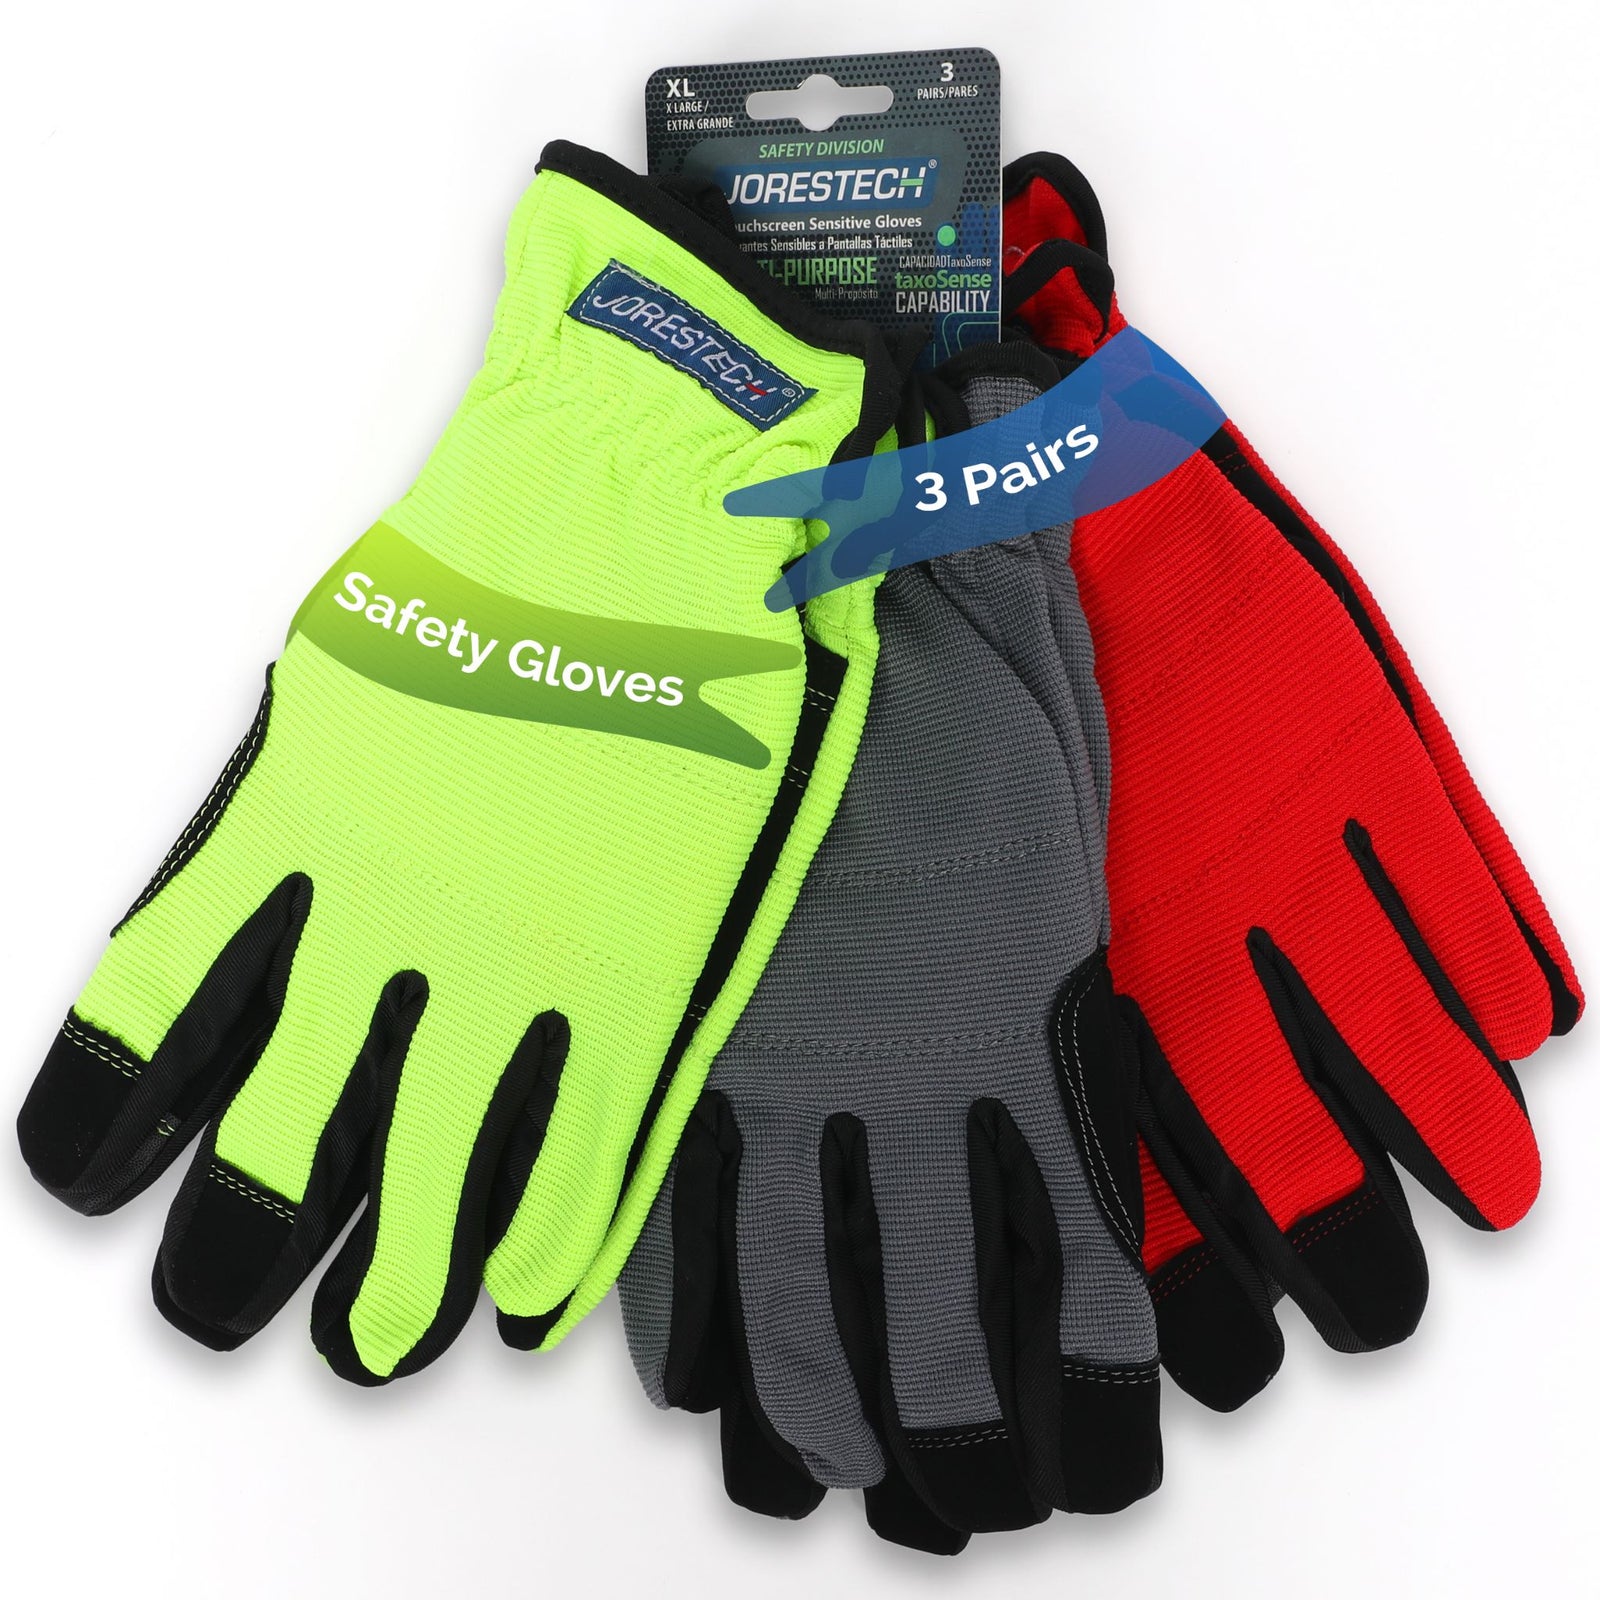 3 pairs of touchscreen safety work gloves of lime, red and gray colors. 